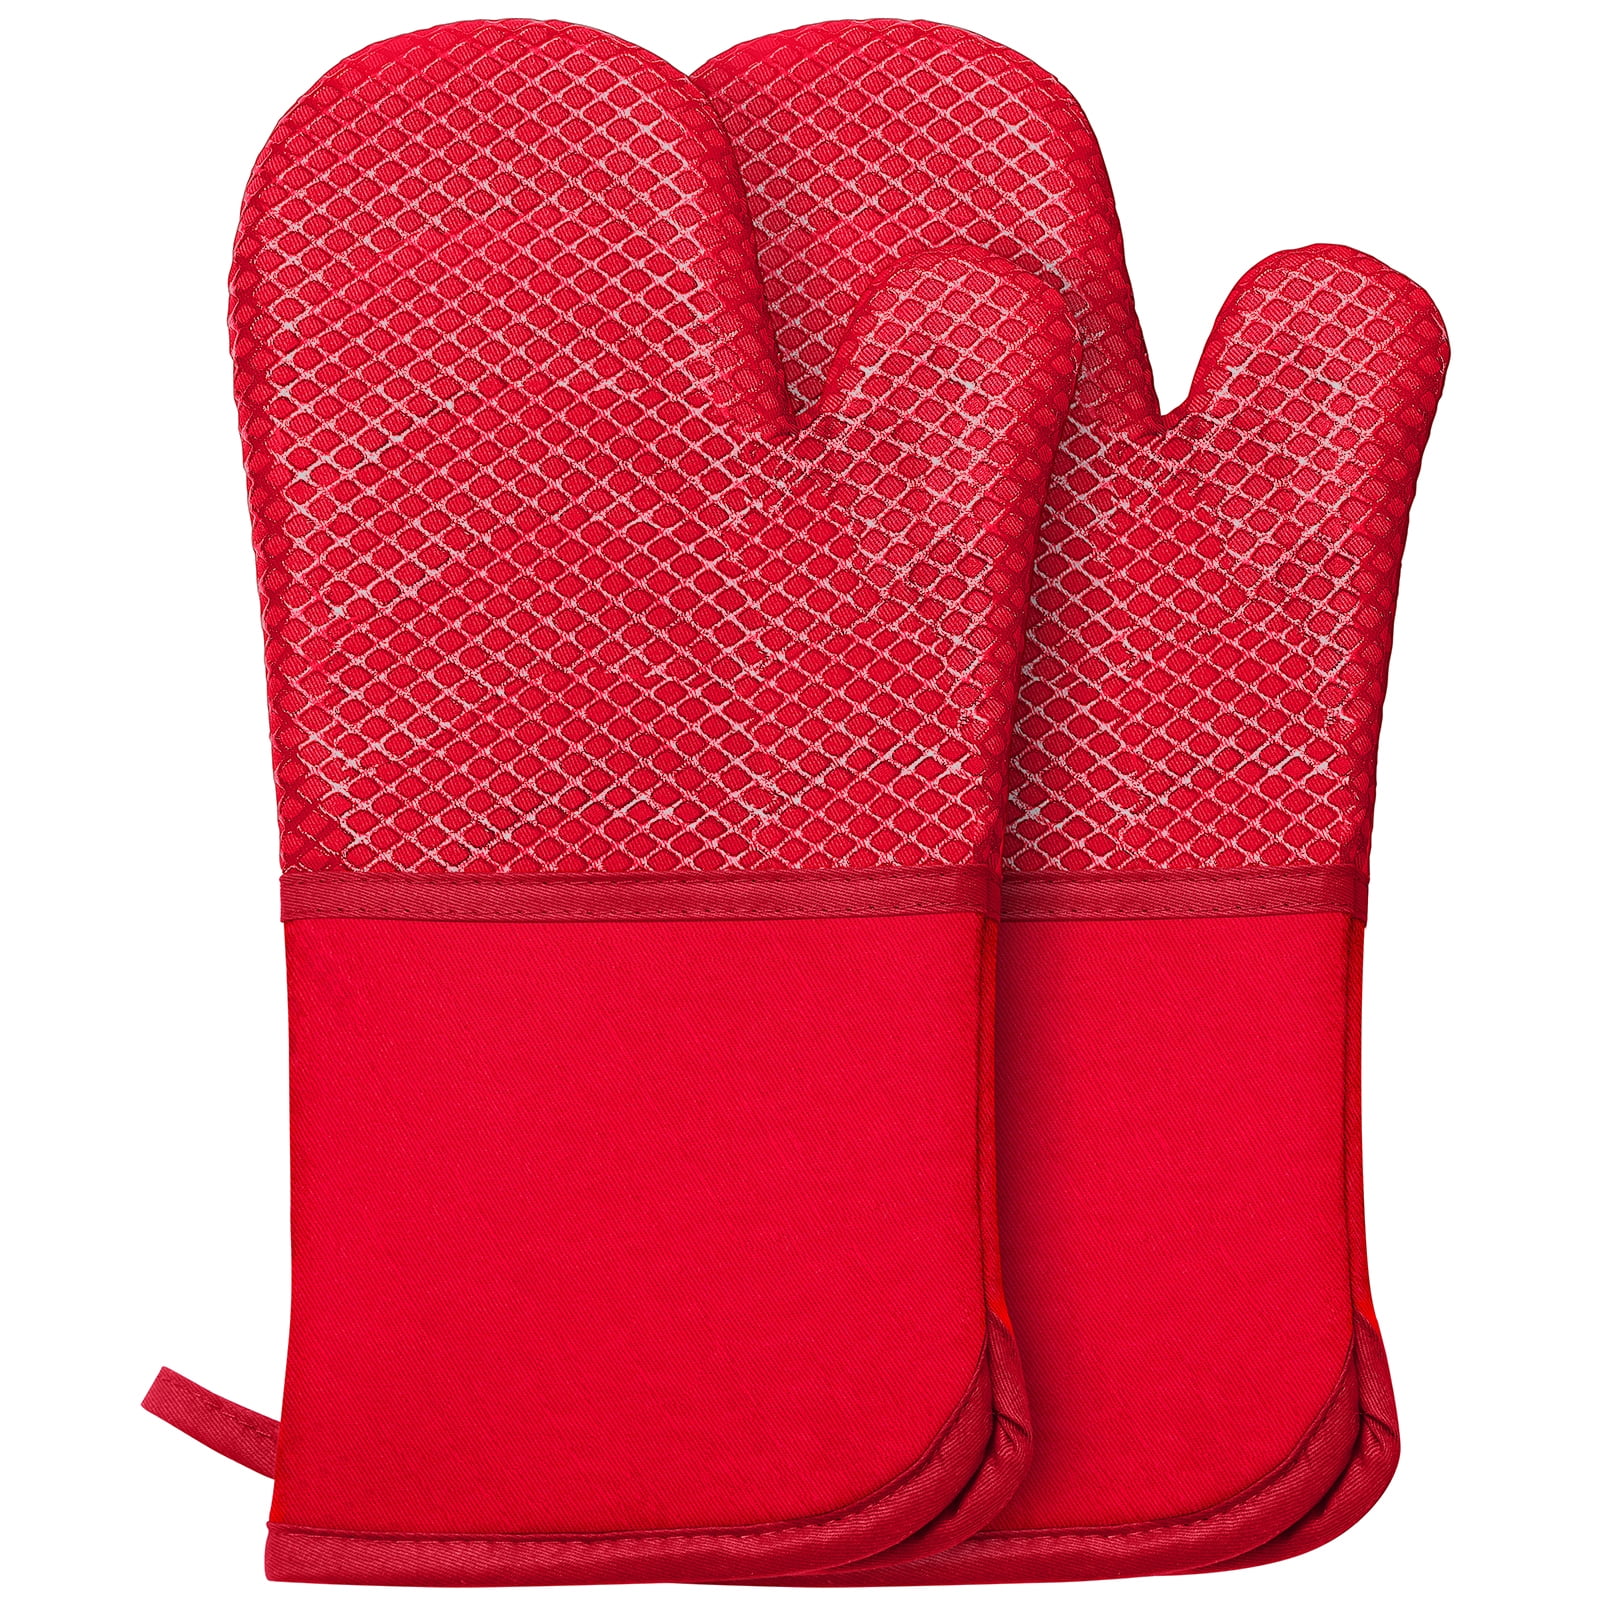 Oven Mitts, Heat Resistant Kitchen Oven Gloves 572°F, Non-Slip Silicone  Surface, Extra Long Flexible Thick Mitts for Kitchen , Cooking , Baking ,  BBQ